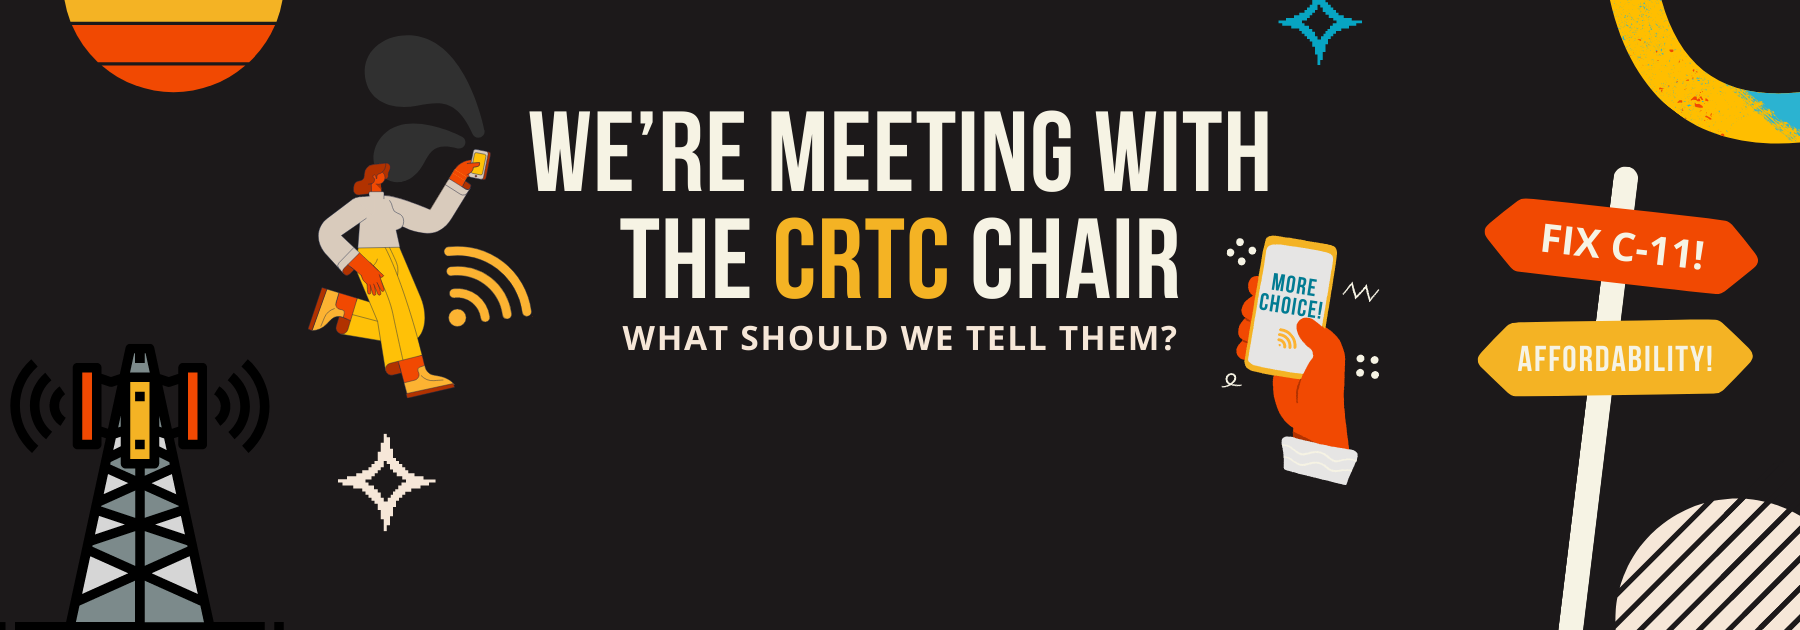 We're meeting with the CRTC chair. What should we tell them?